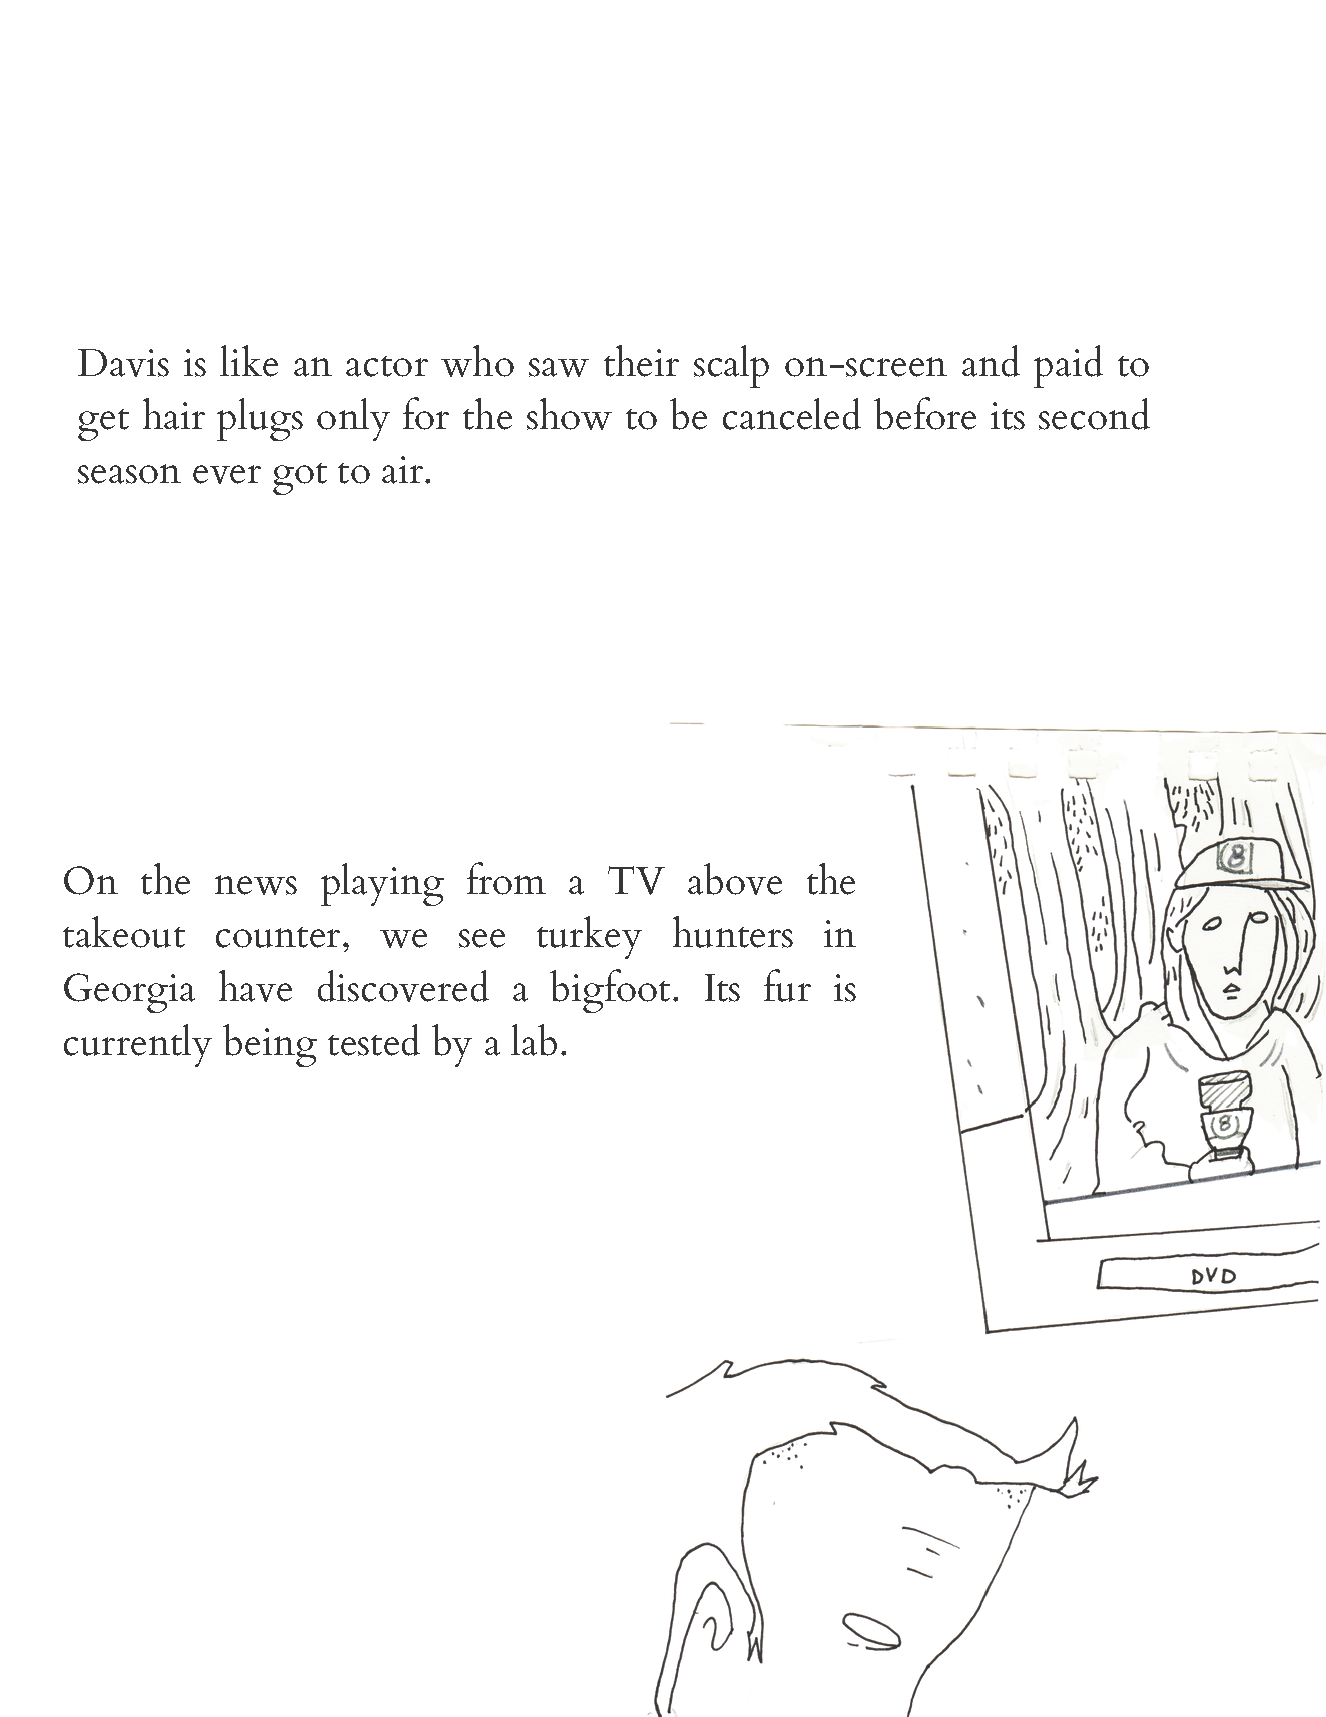 Royal_Pine_Dahlke_Page_2.png